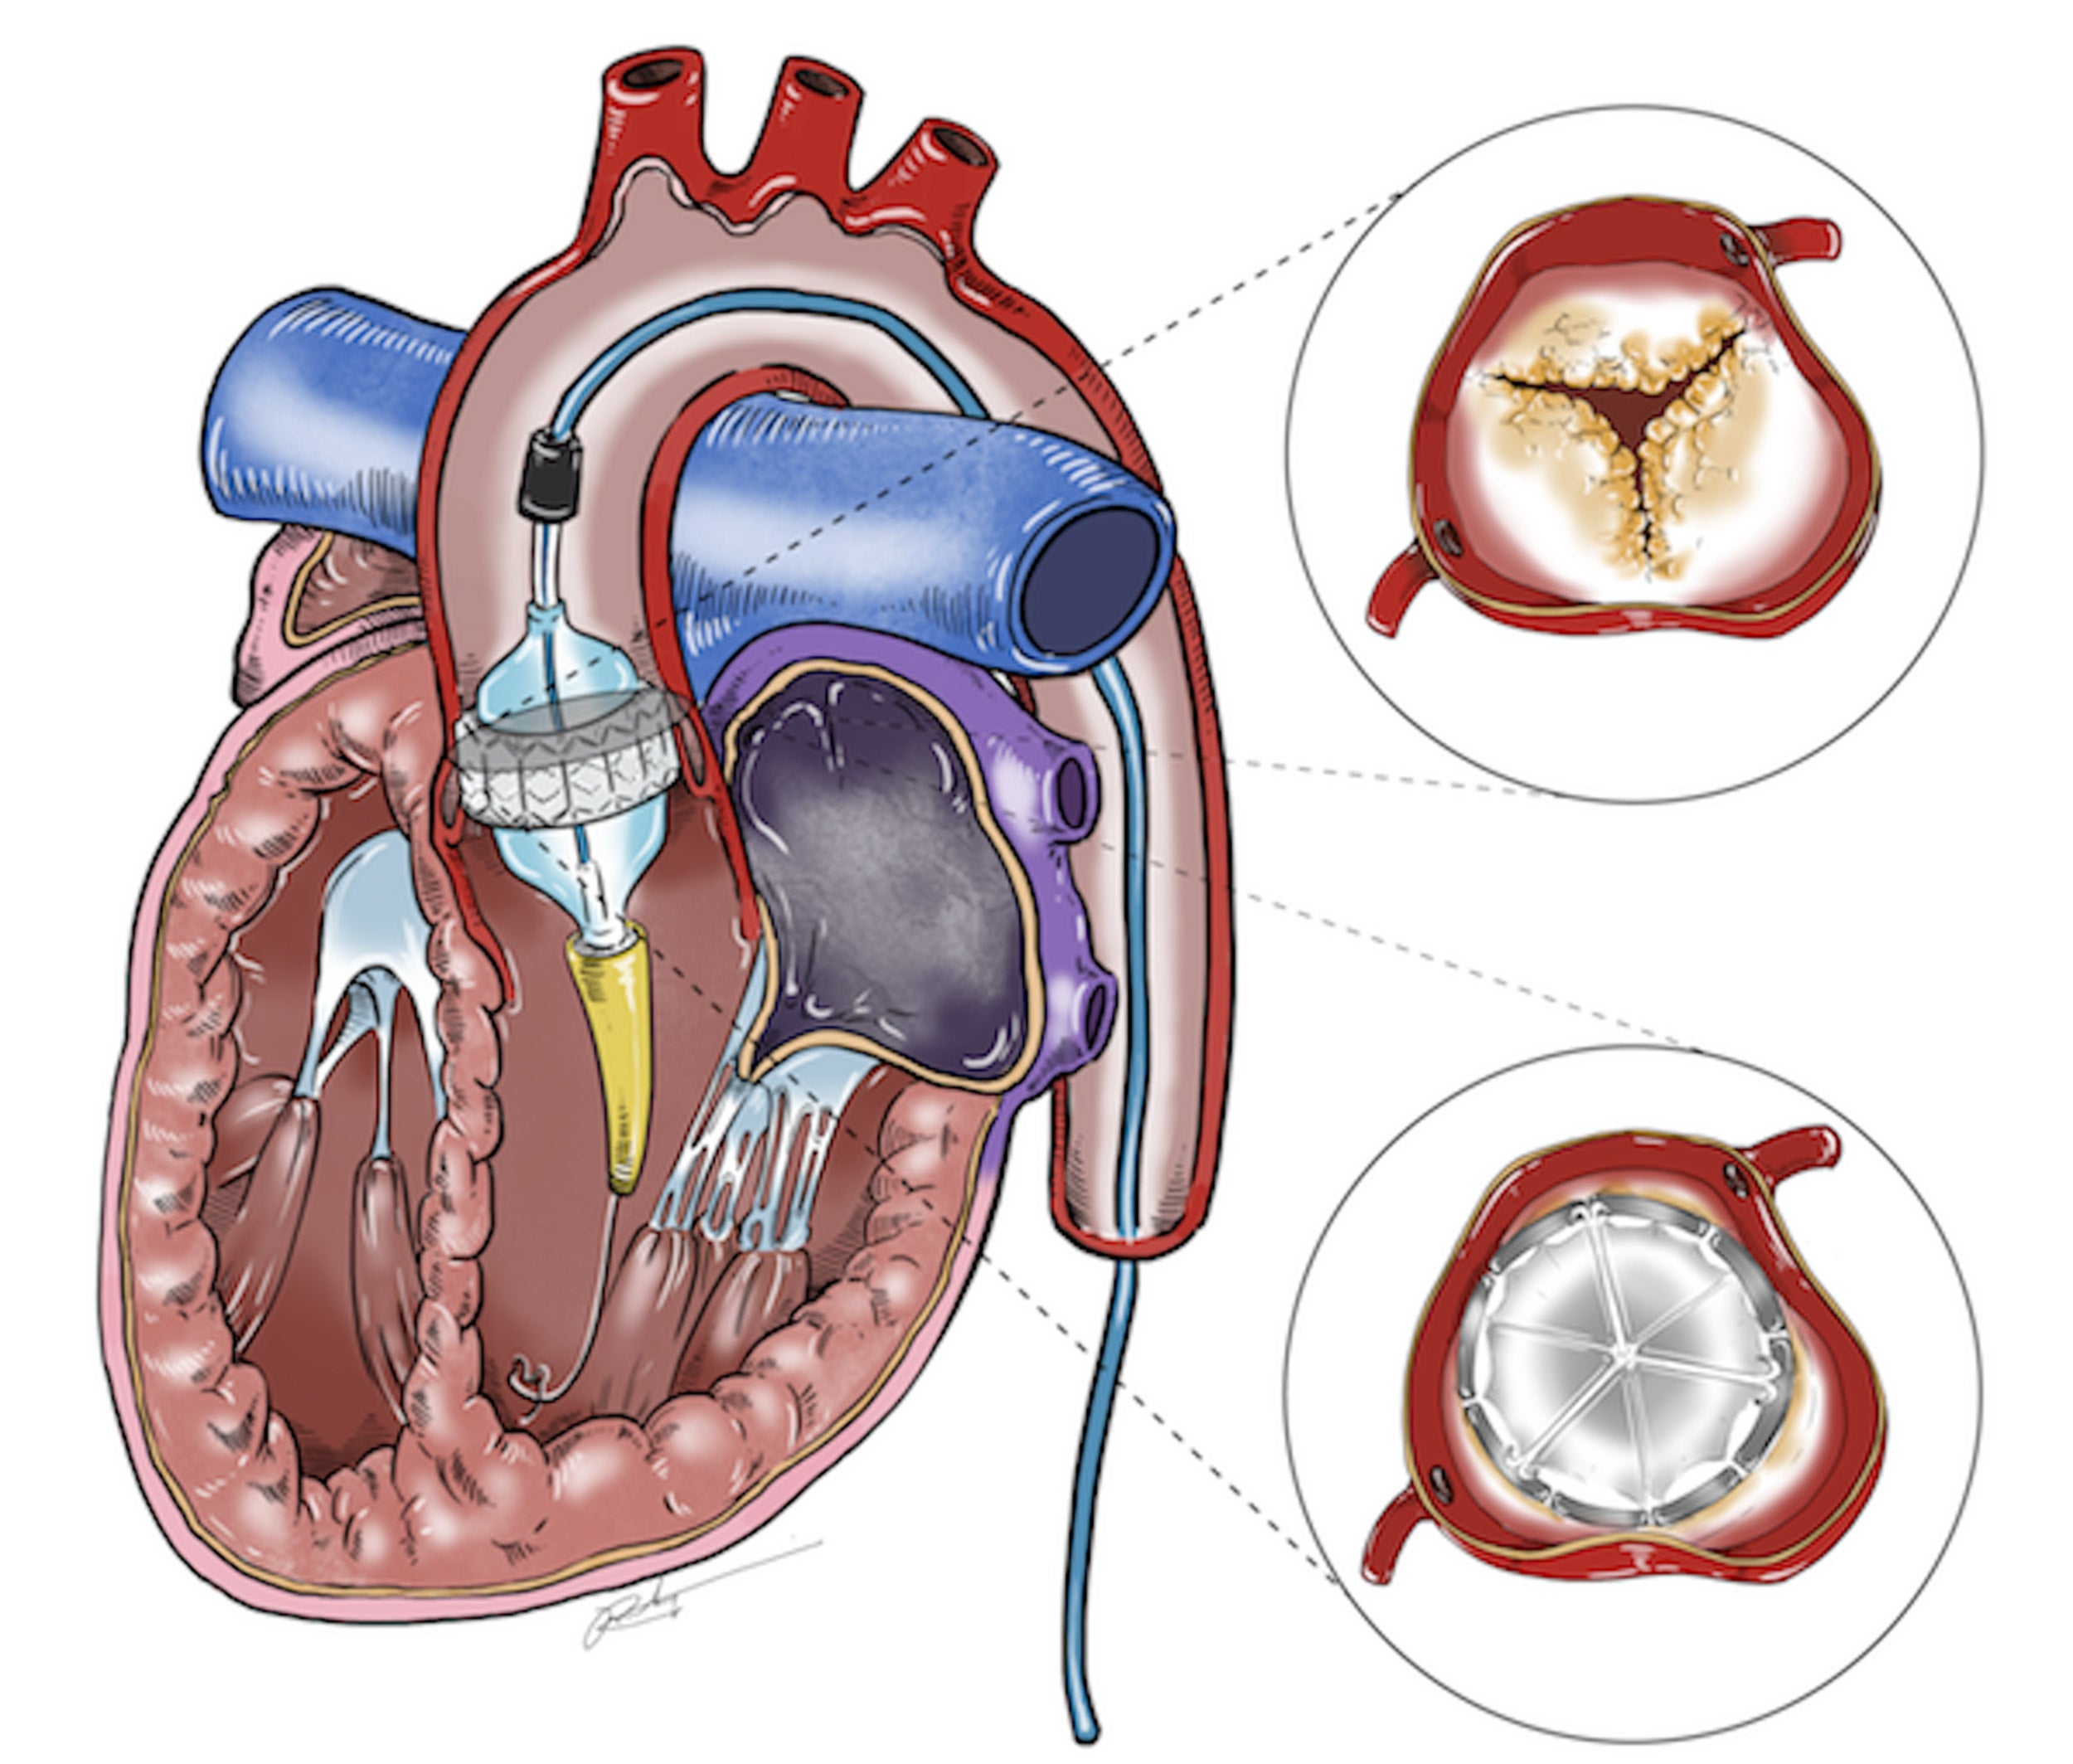 Drawing of aortic valve replacement.